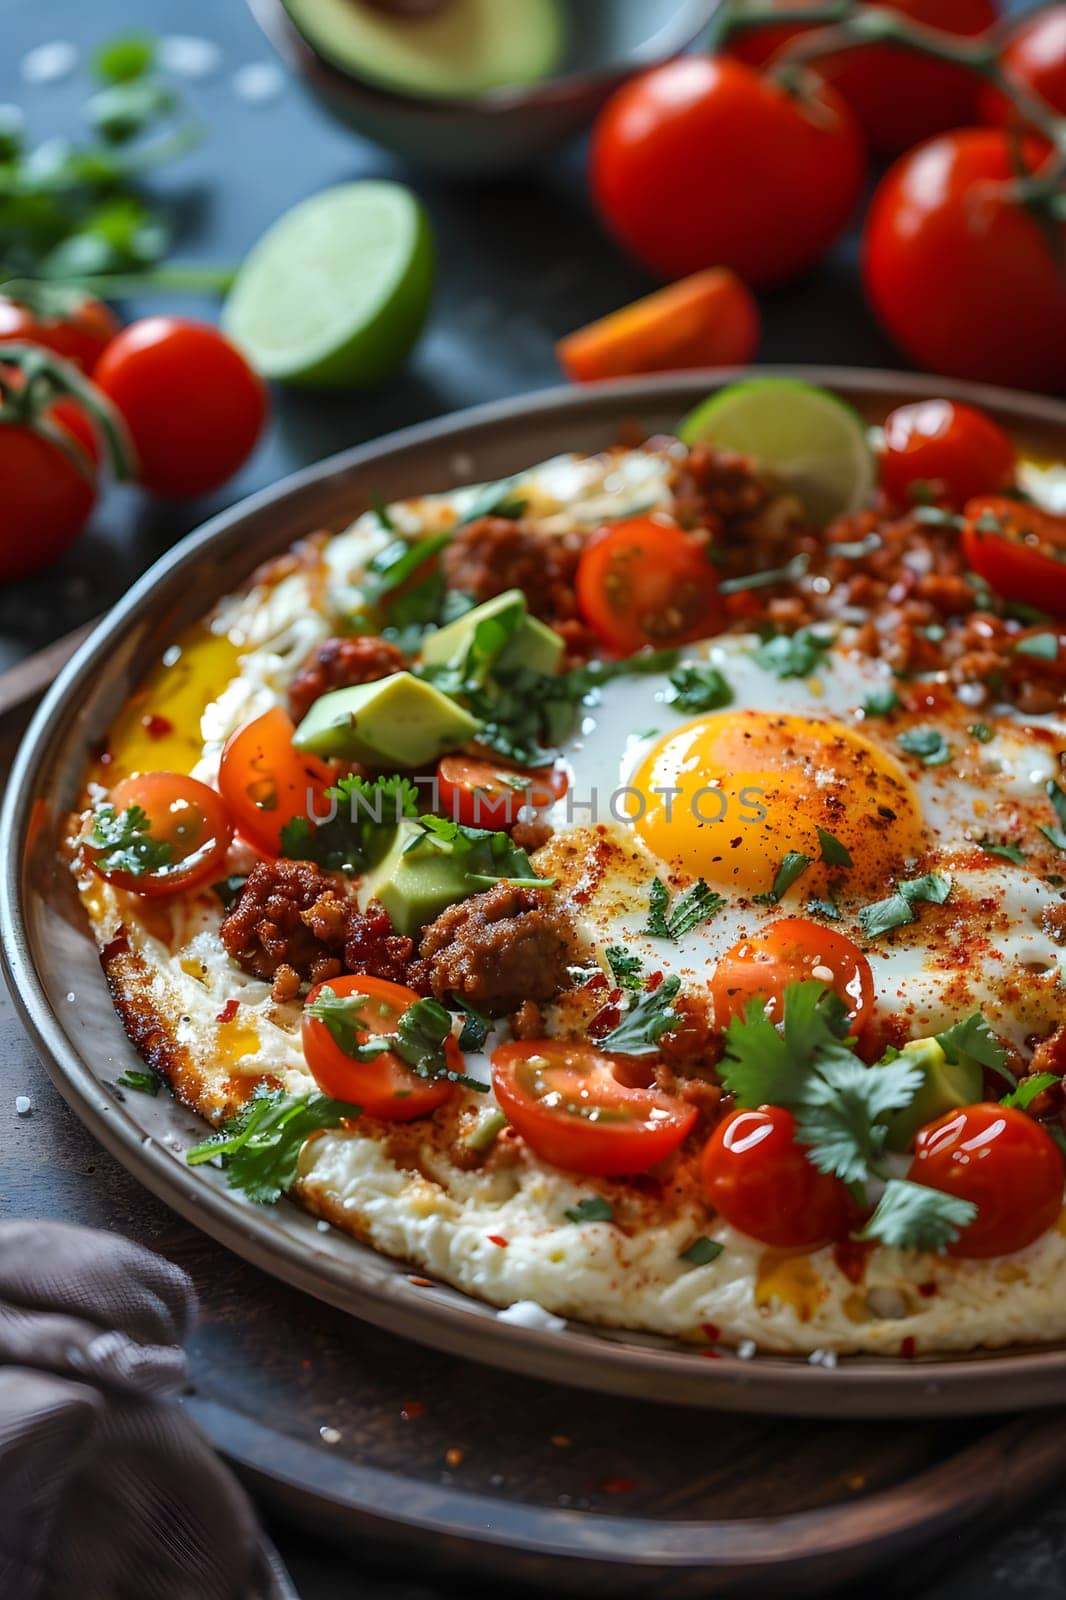 A Californiastyle pizza topped with eggs, plum tomatoes, avocado, and sausage, served on a plate as a delicious and unique combination of ingredients